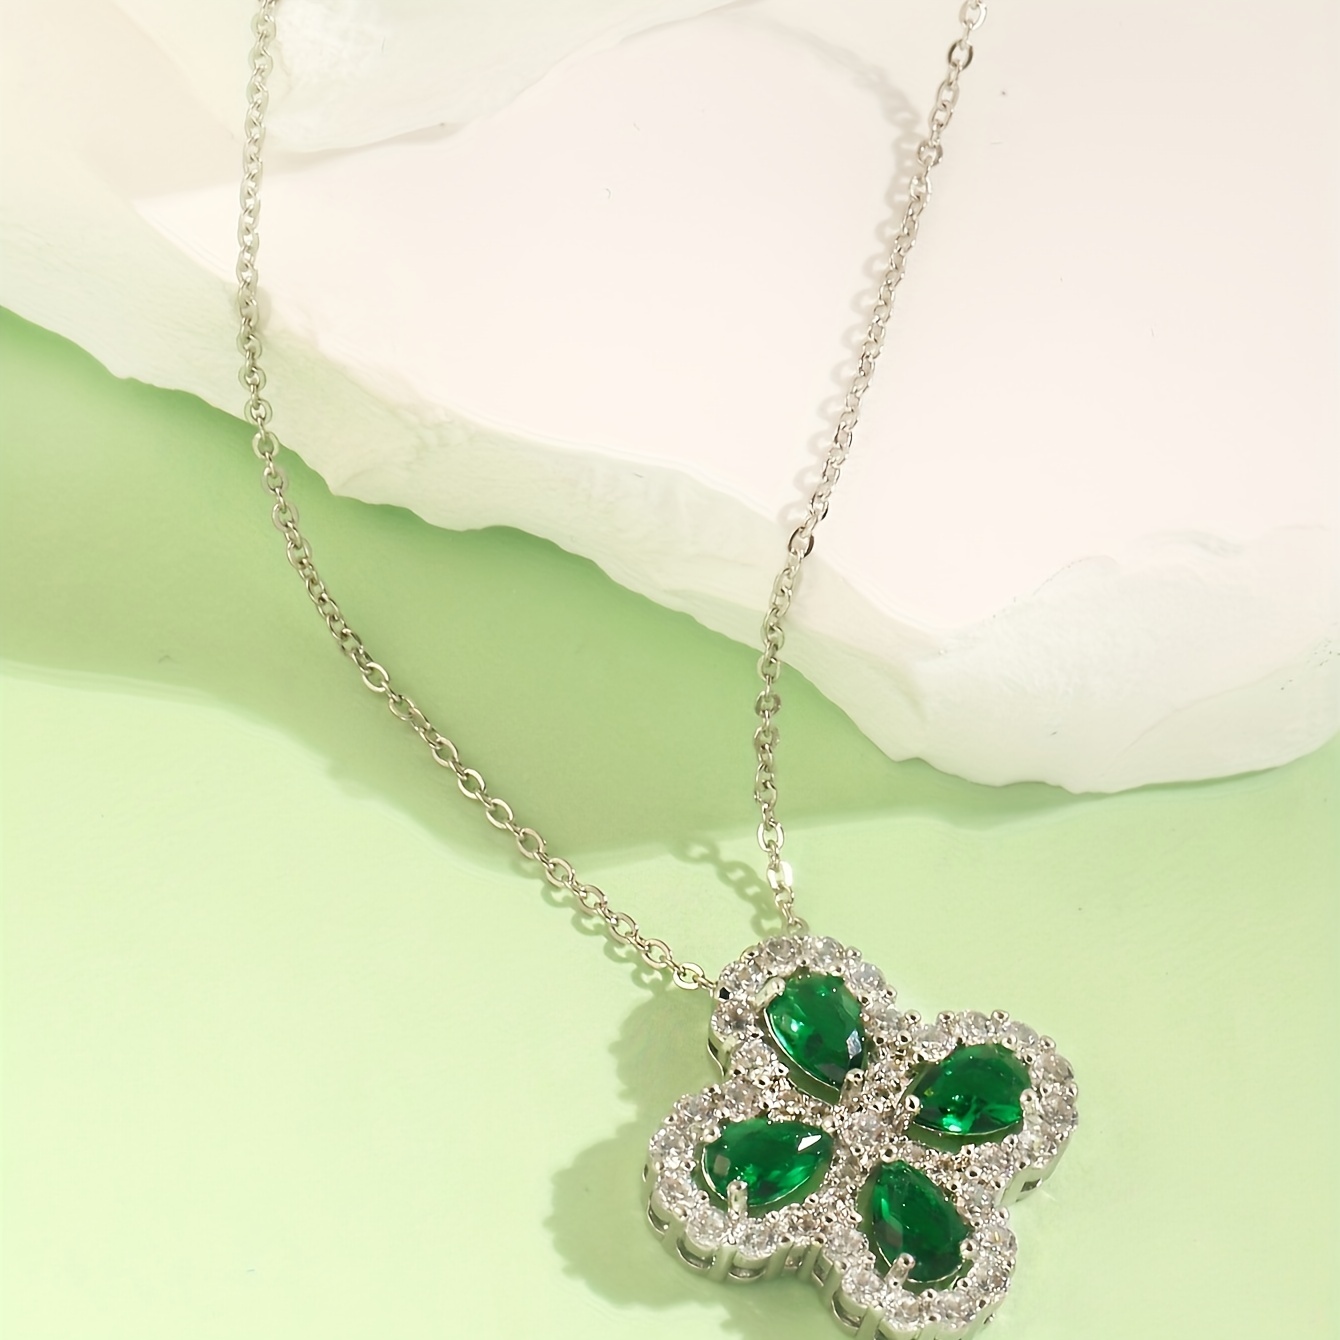 1pc Fashionable Green Lucky Four-leaf Clover Pendant Necklace